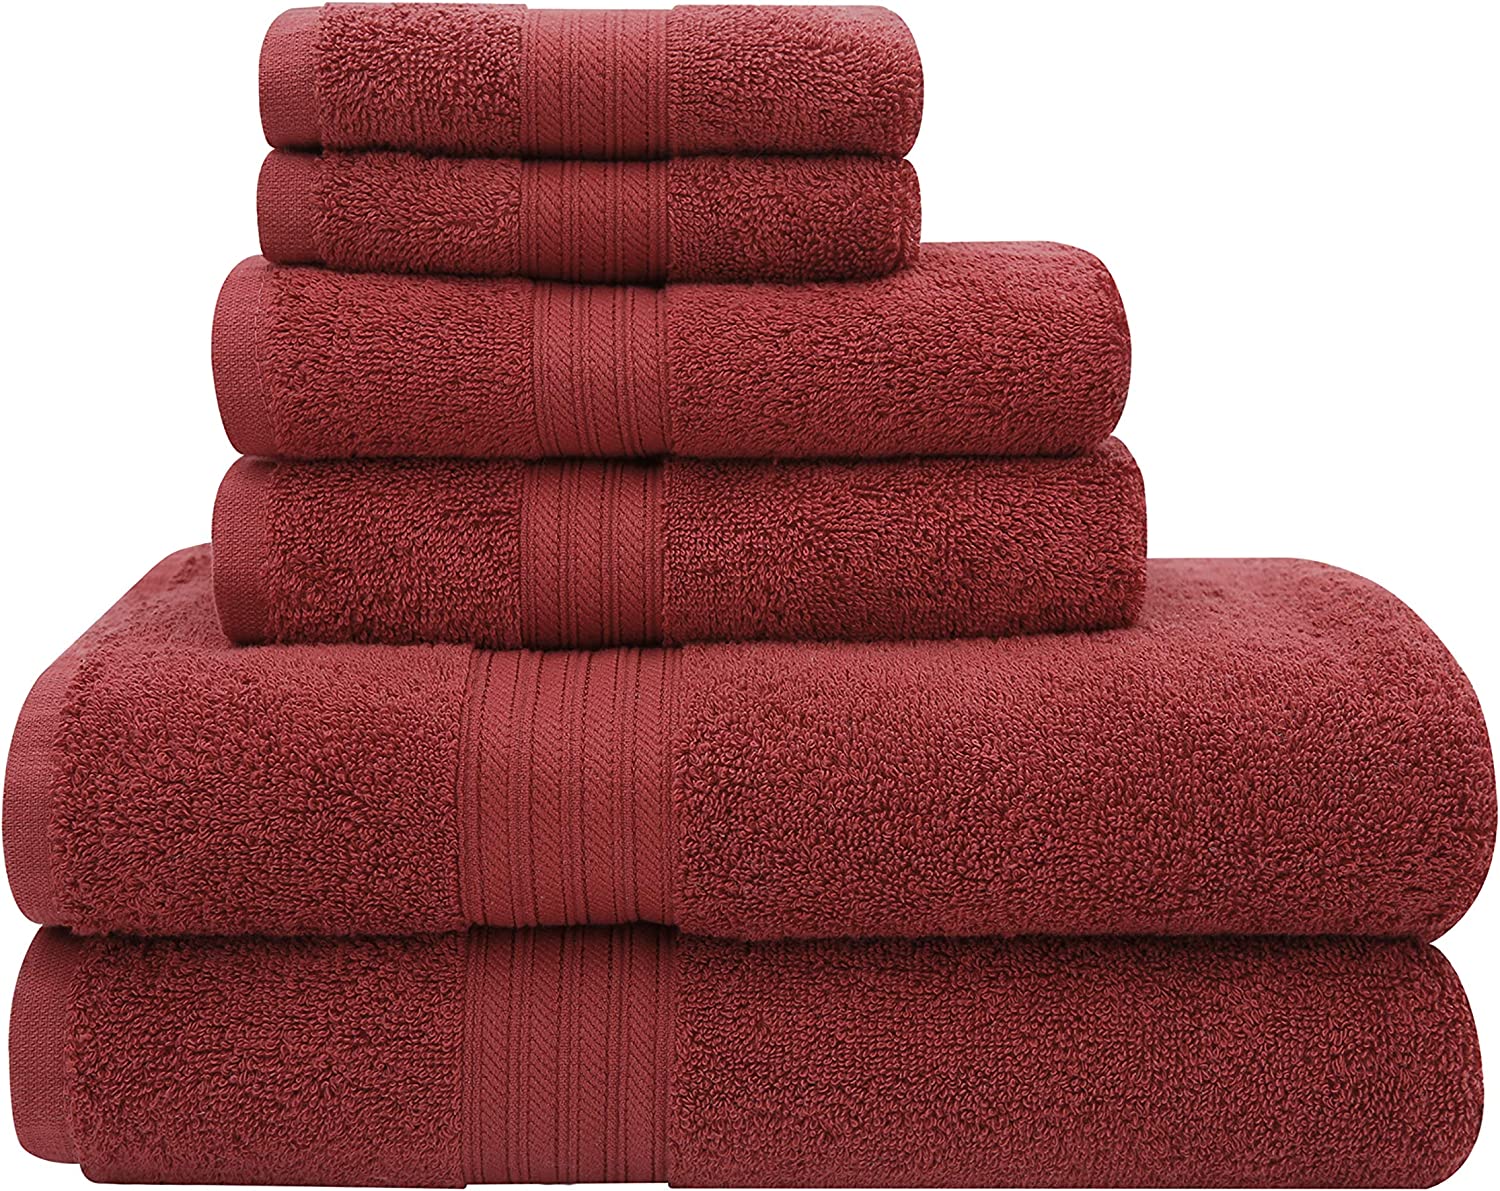 Baltic Linen Majestic Heavy Weight Cotton Towels, 2 Bath Towels, 2 Hand Towels, 2 Washcloths, Red, 6 Piece Set